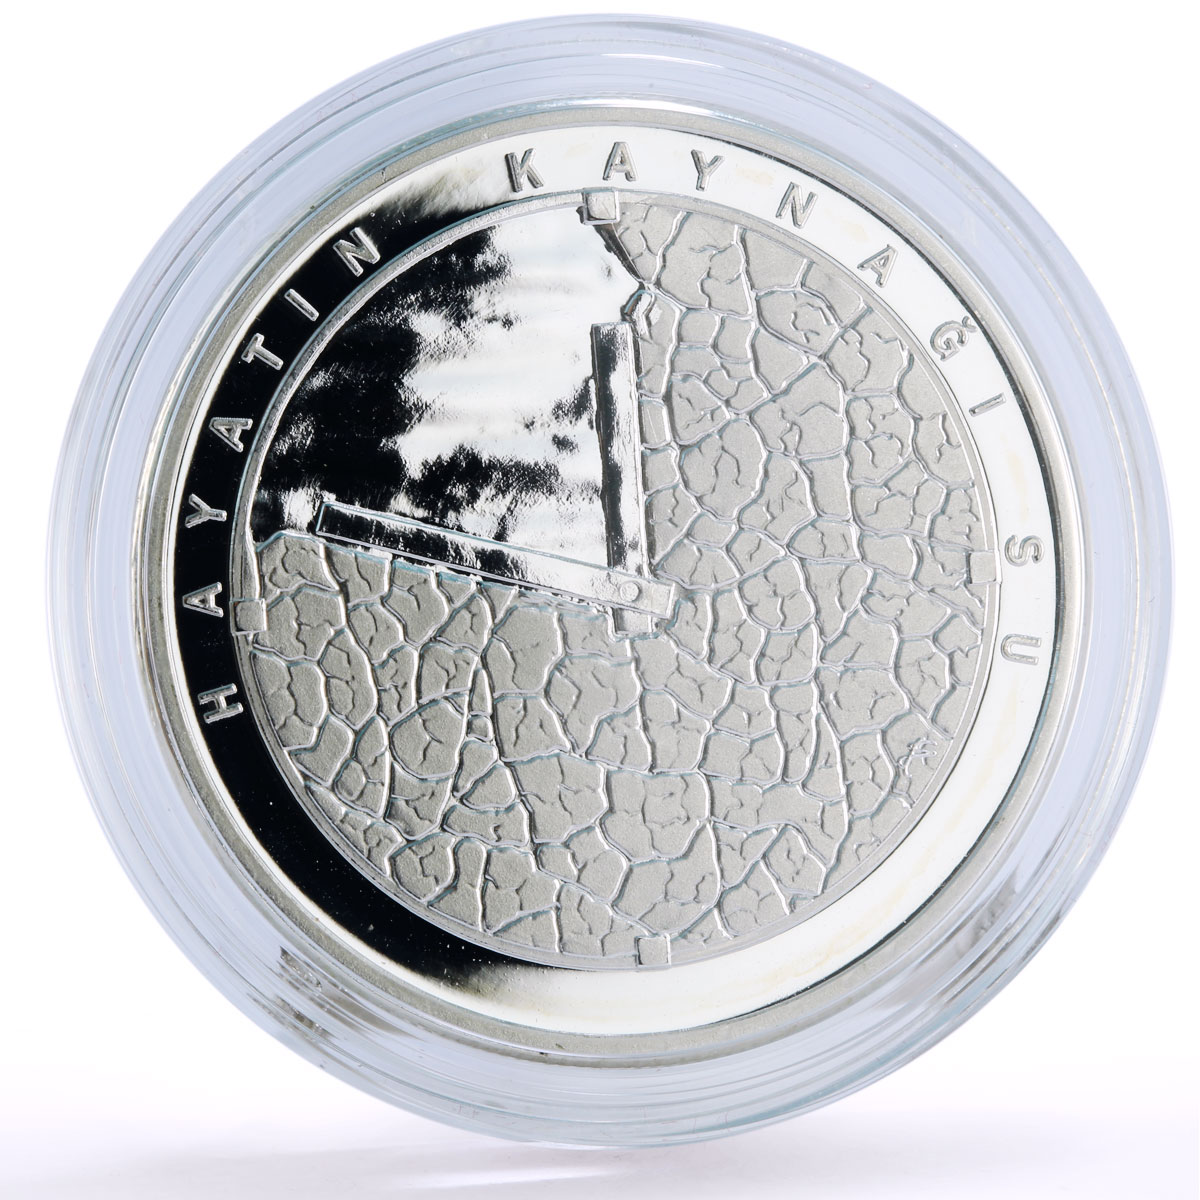 Turkey 50 lira Global Warming Threat Water is Source of Life silver coin 2009